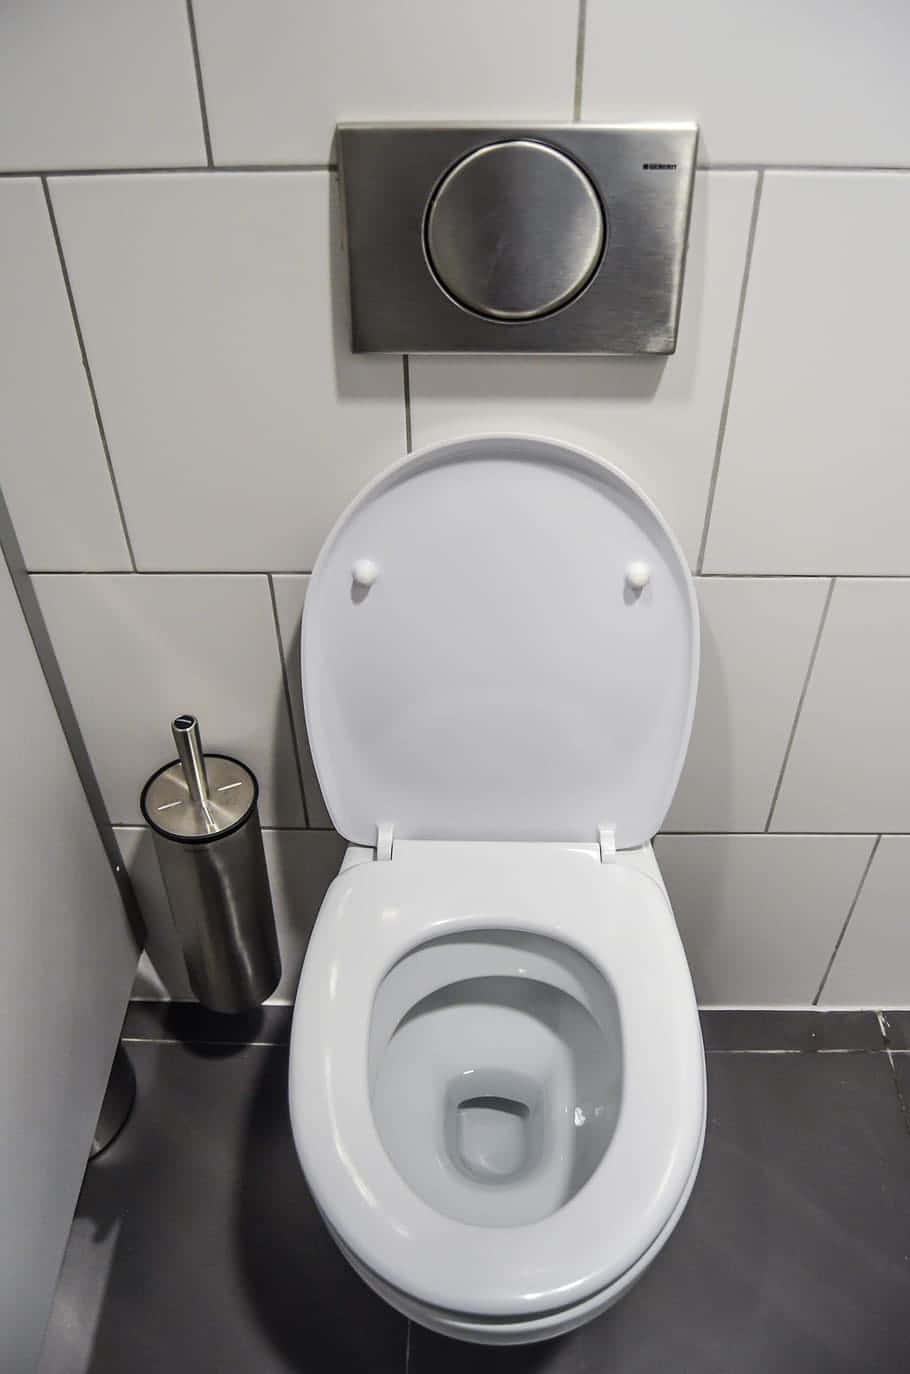 A Toilet In A Bathroom With A Seat Open